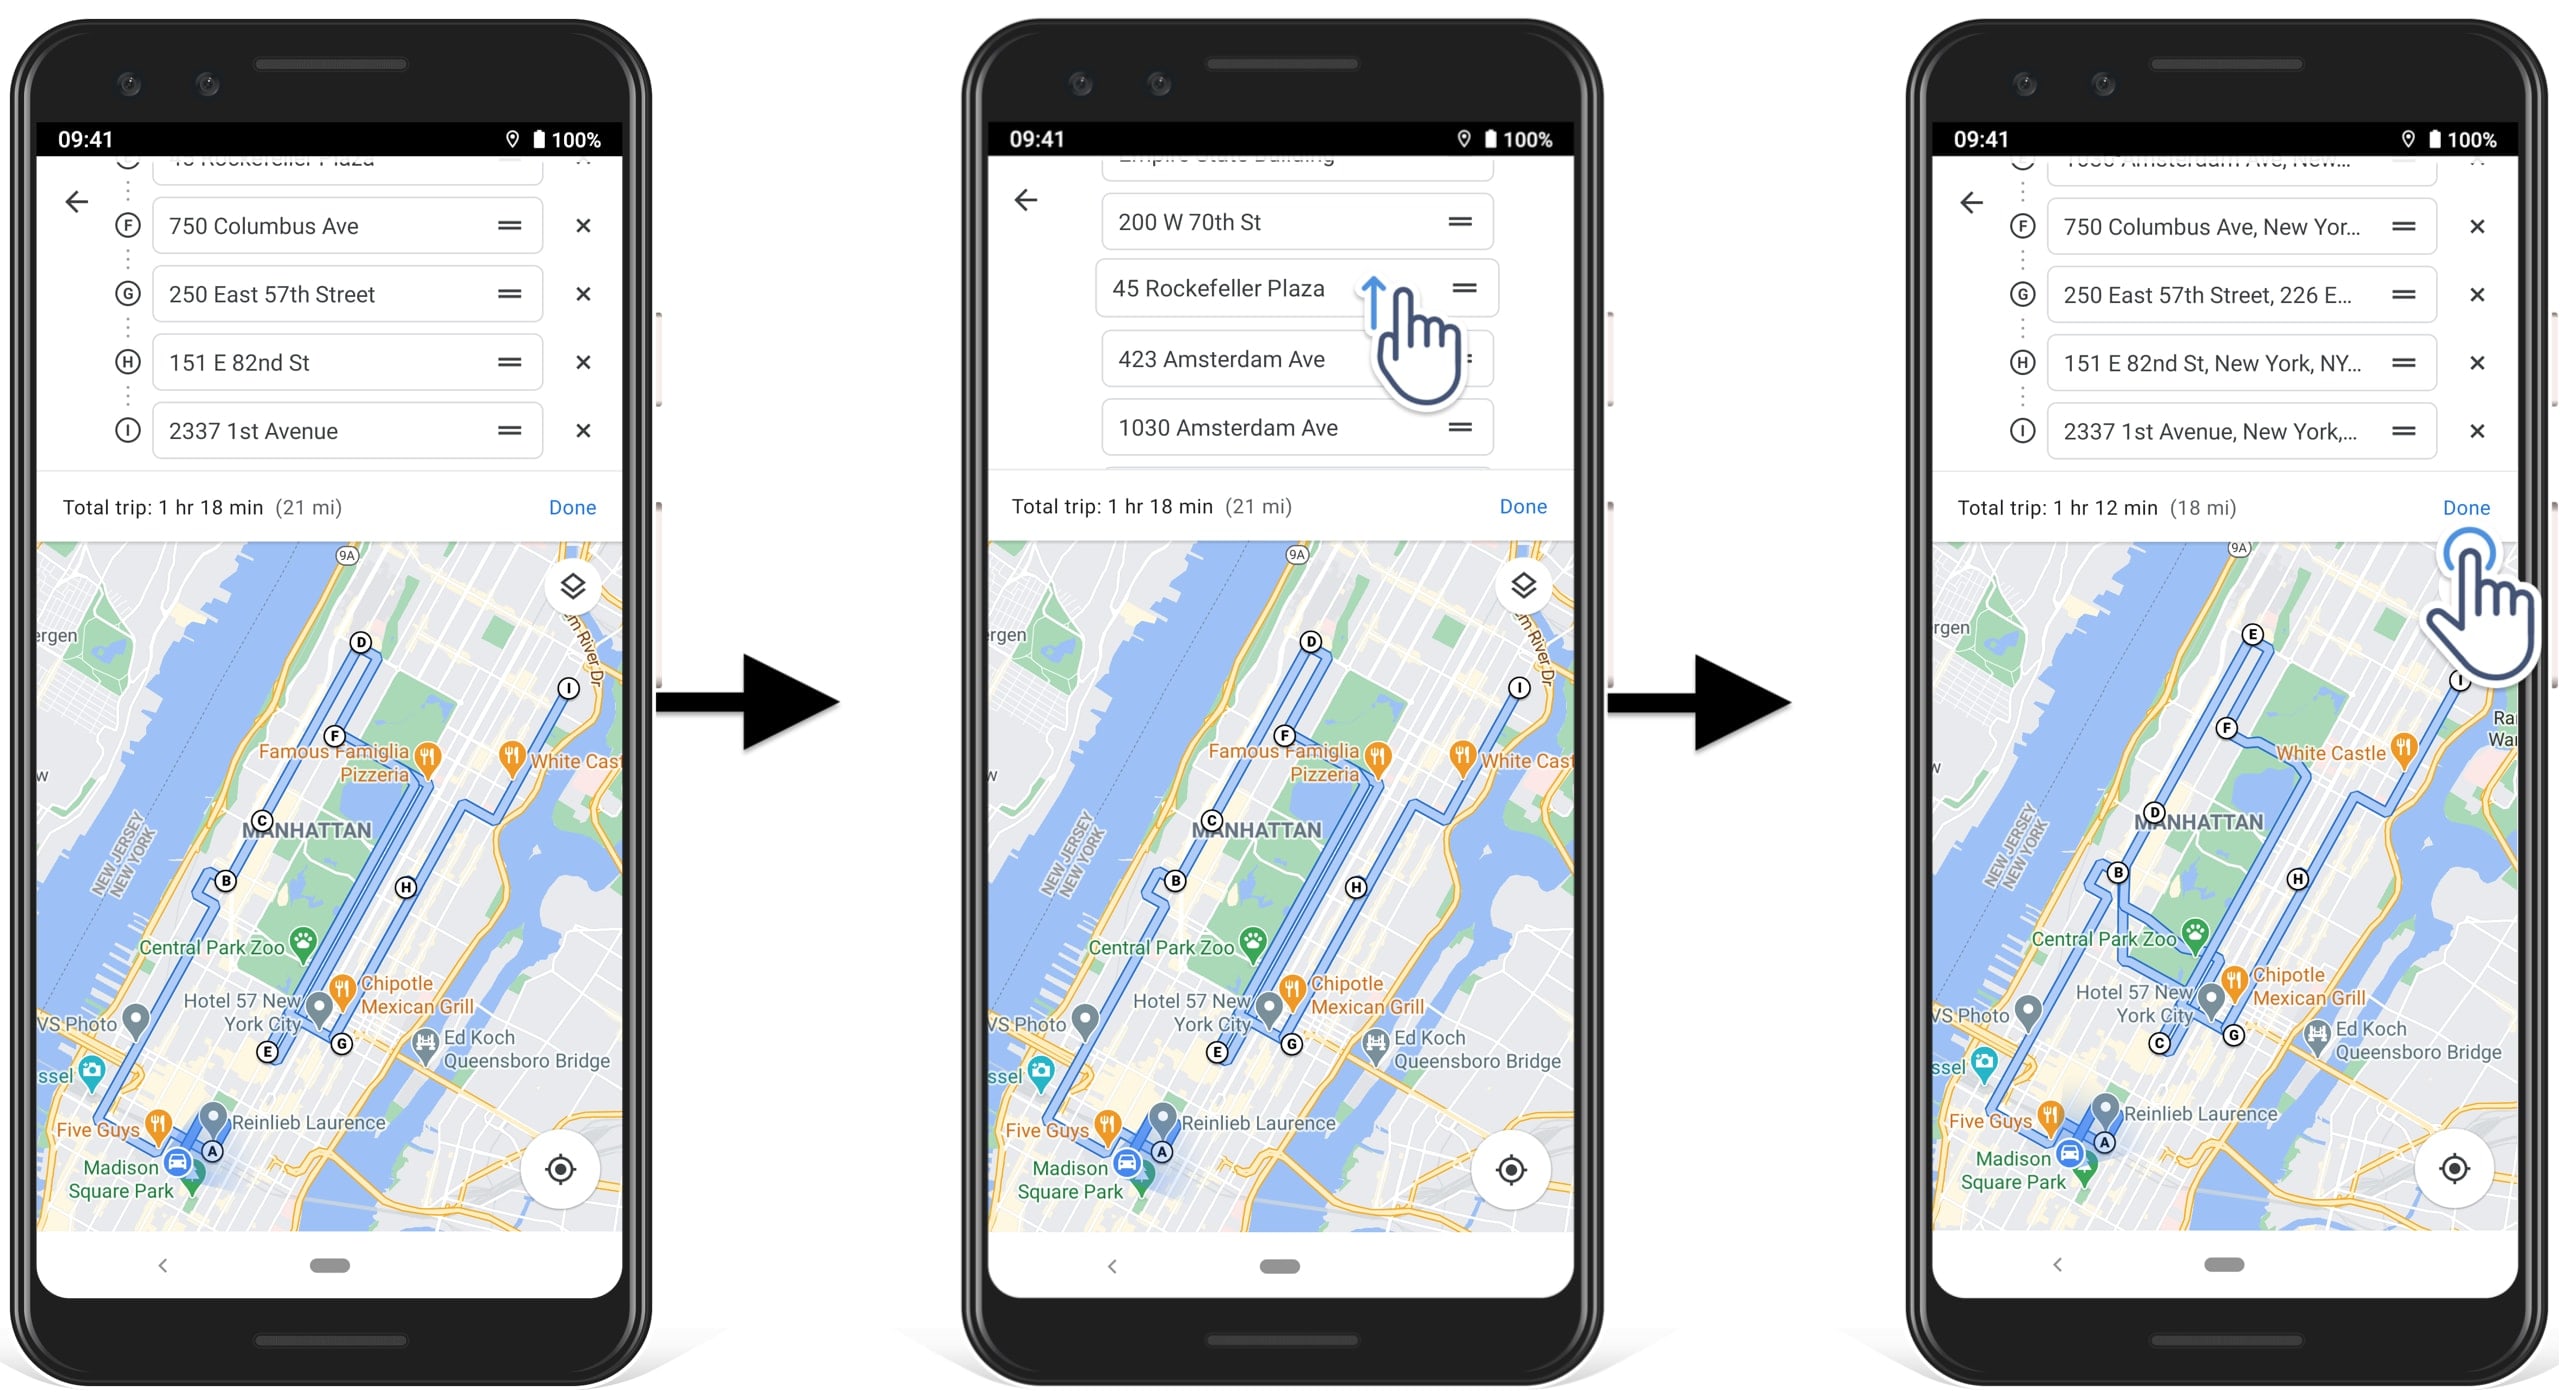 Reordering destinations or stops on a multiple stops route on the multi-stop Google Maps route planner app